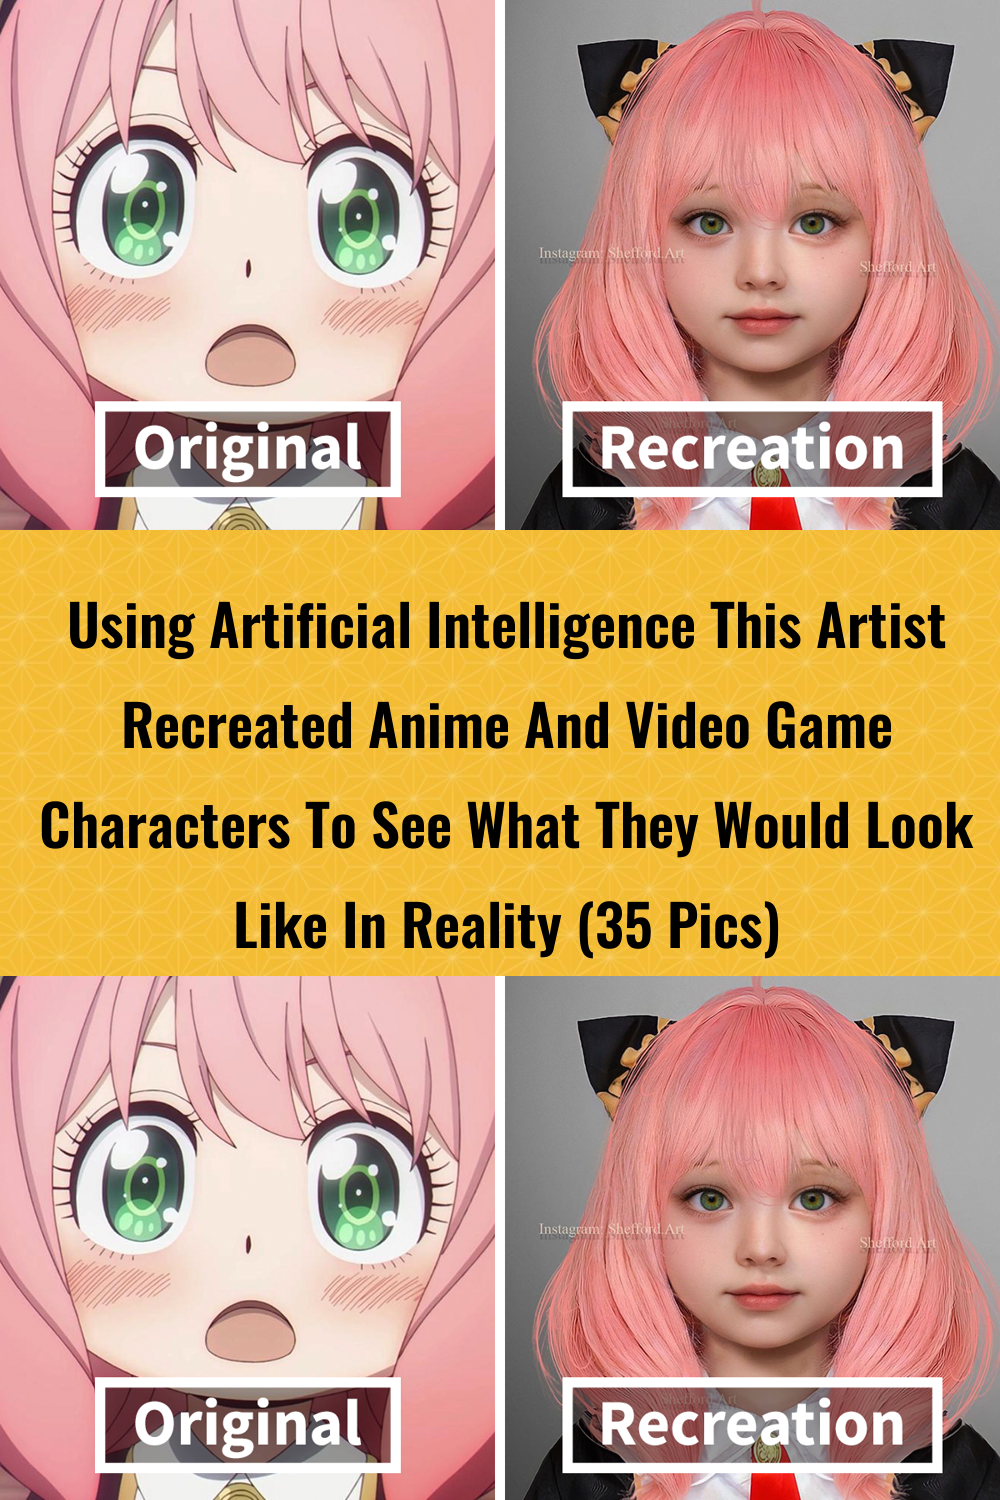 Using Artificial Intelligence, This Artist Recreated Anime And Video Game Characters To See What The